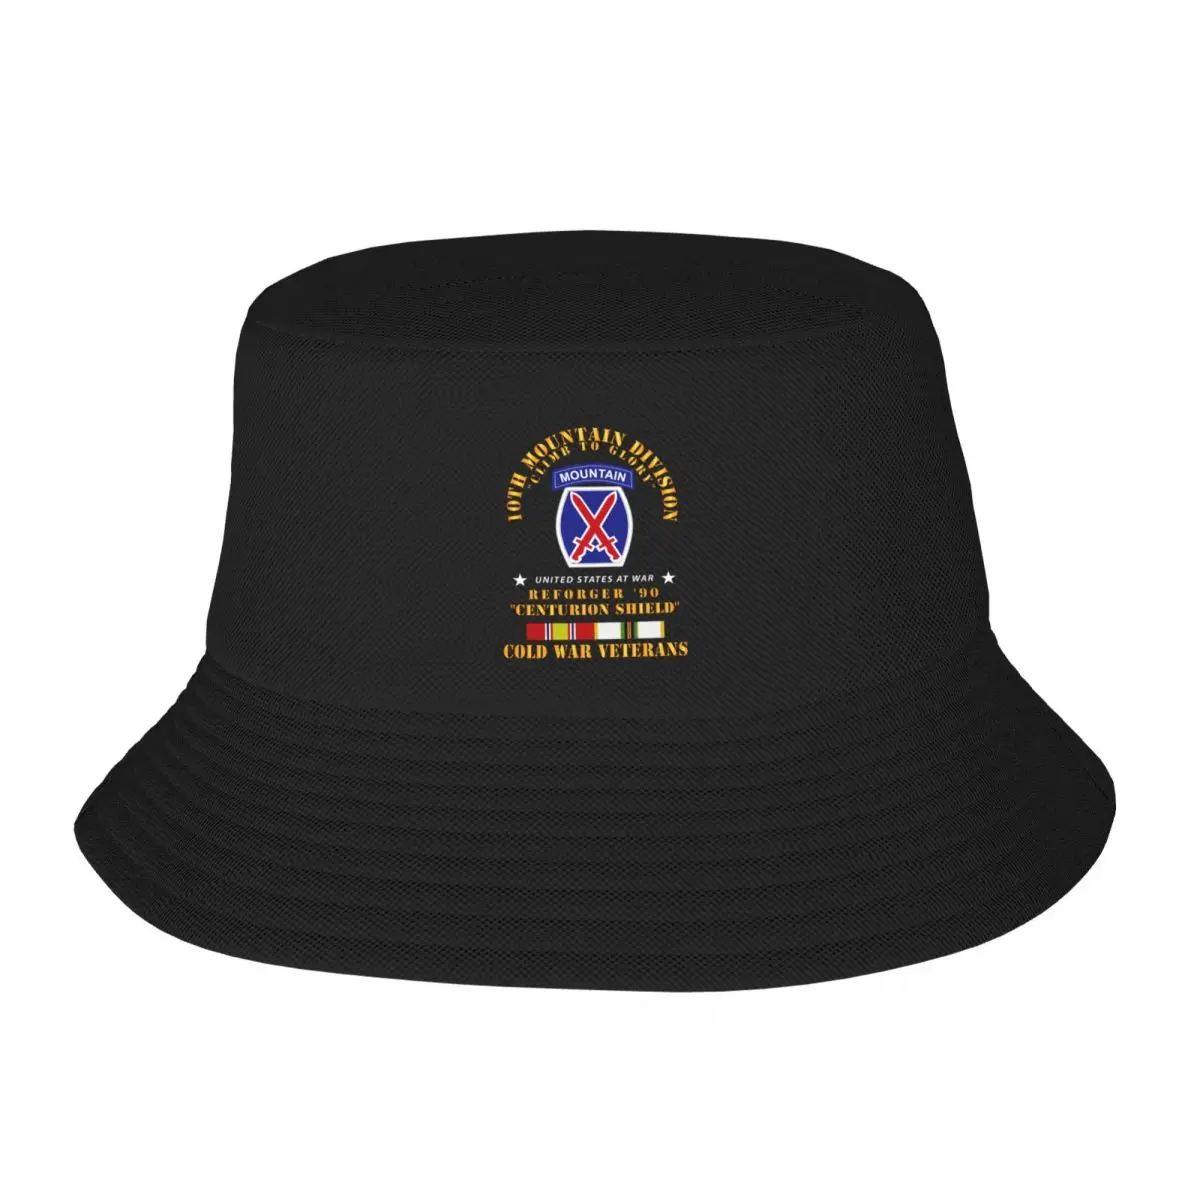 

New 10th Mountain Division - Climb to Glory - REFORGER 90, CENTURION SHIELD- COLD X 300 Bucket Hat Luxury Hat Mens Hat Women's